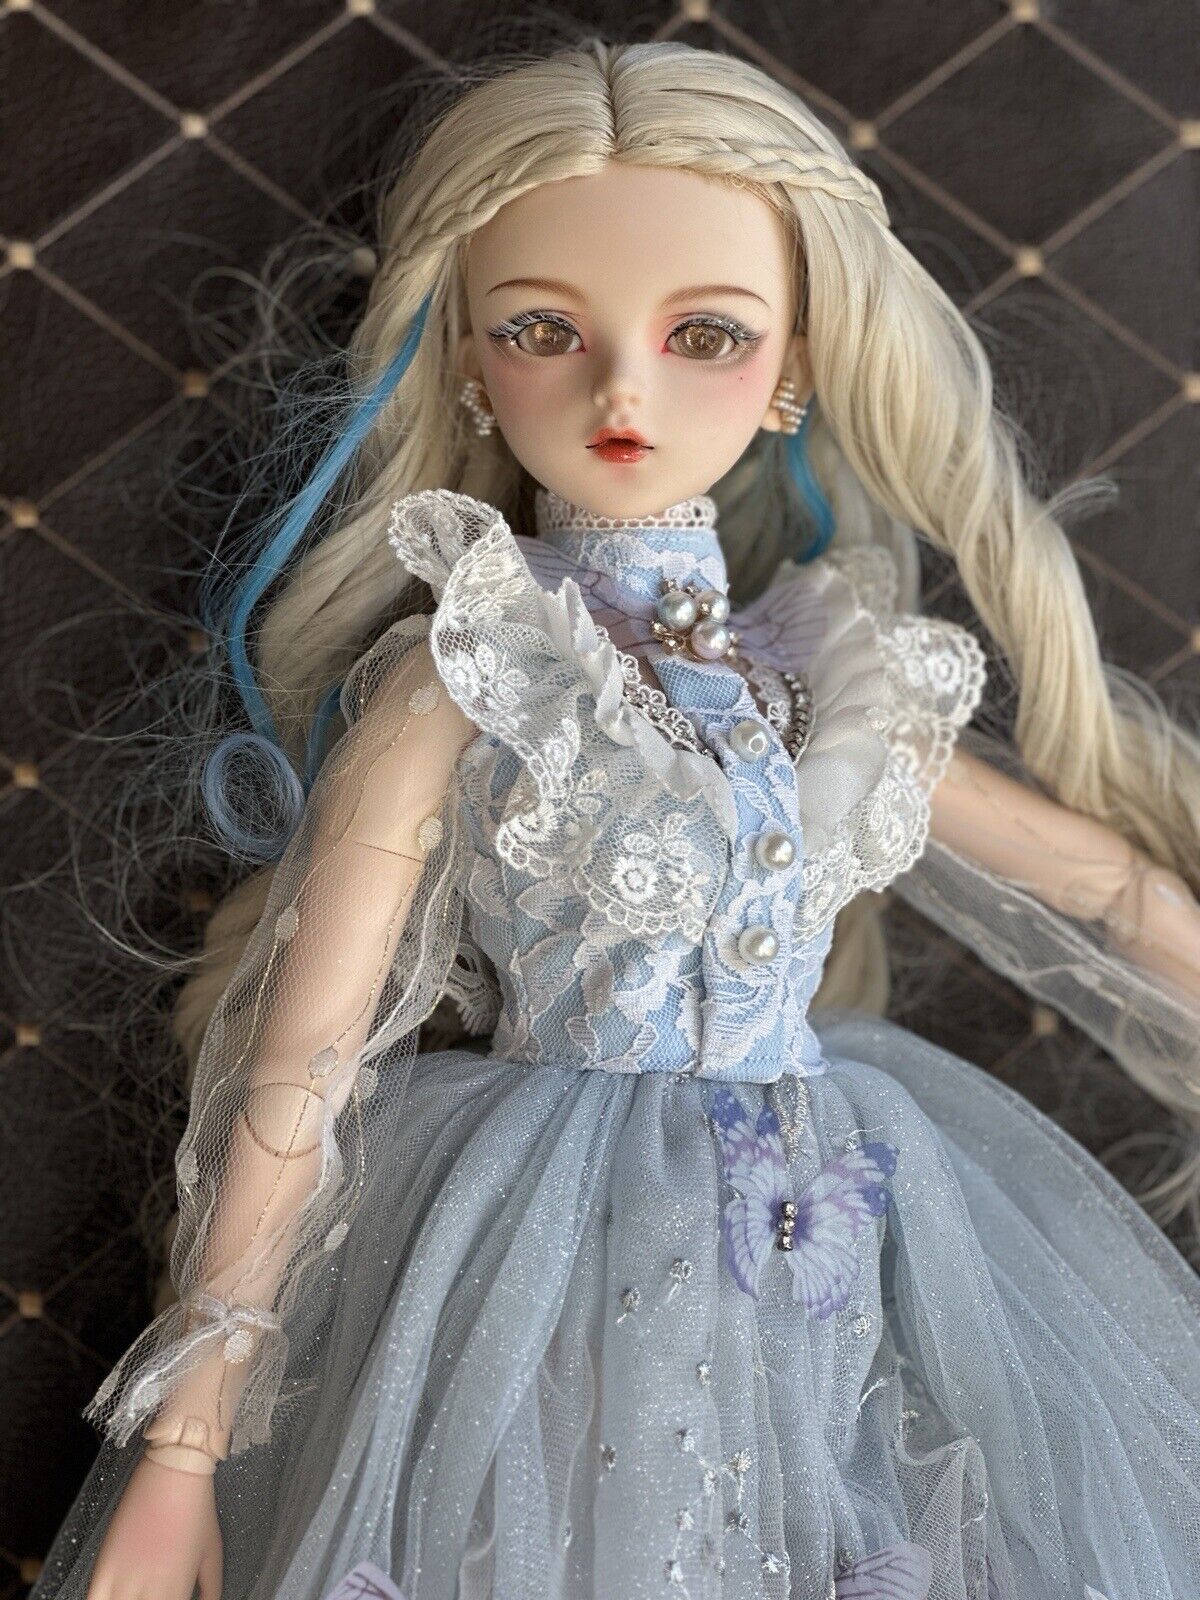 Collectible Doris Doll 1/3 BJD 23" Jointed Doll Full Set Dressed